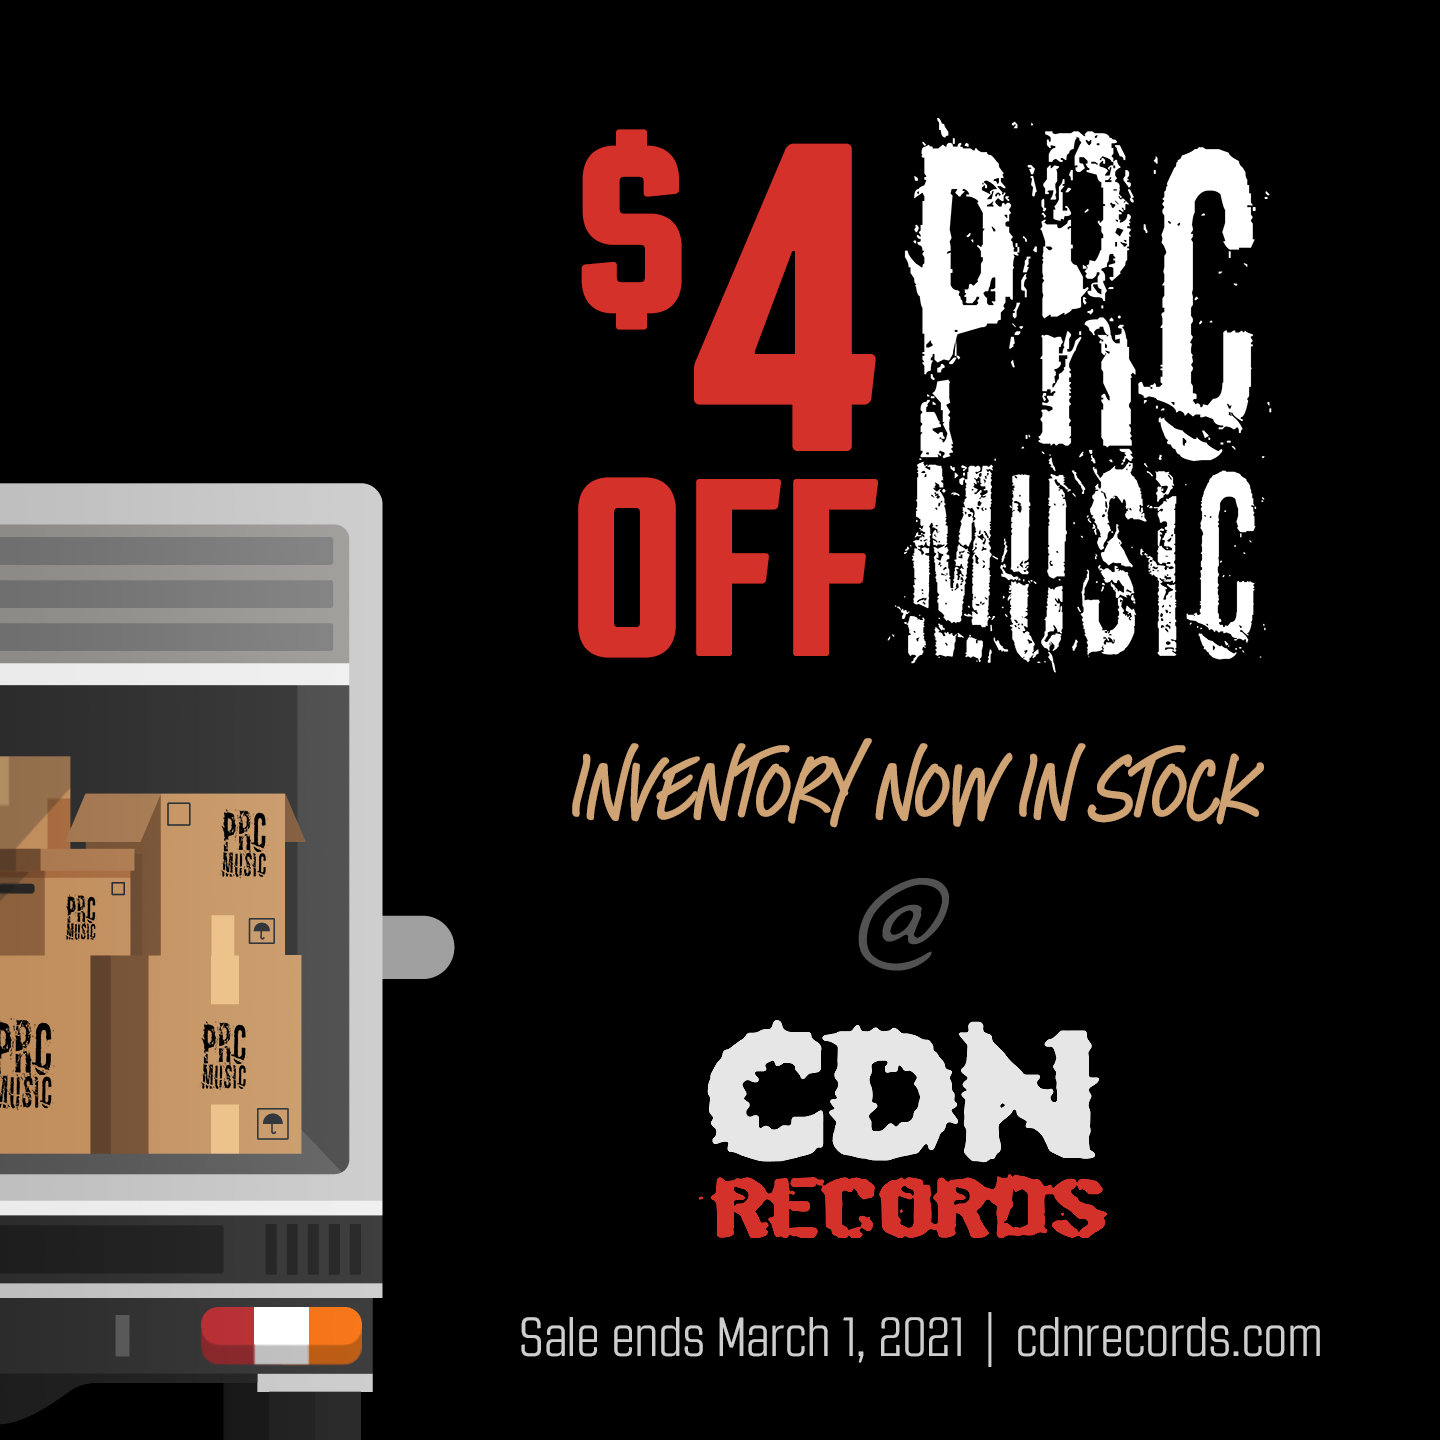 Promo graphic for $4 Off PRC Music titles